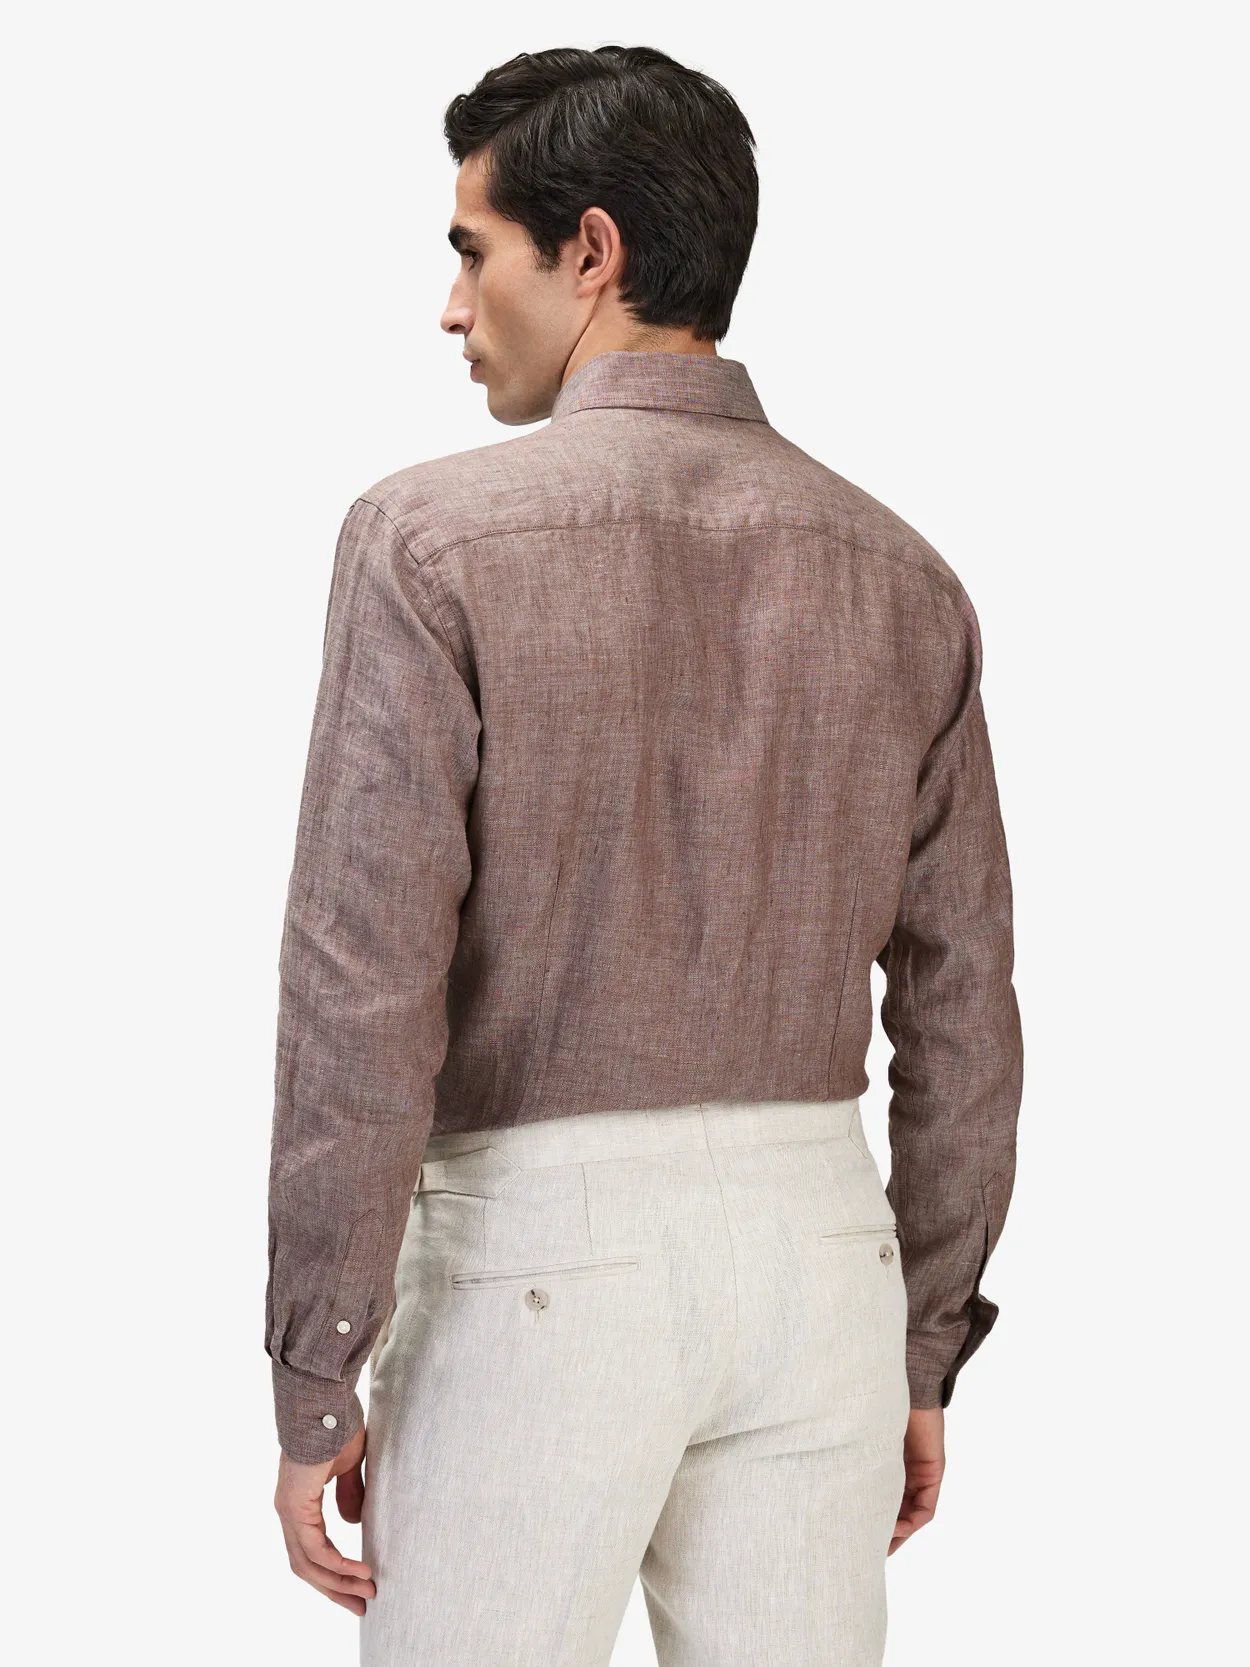 Image number 8 for product Sand Linen Suit & Shirt